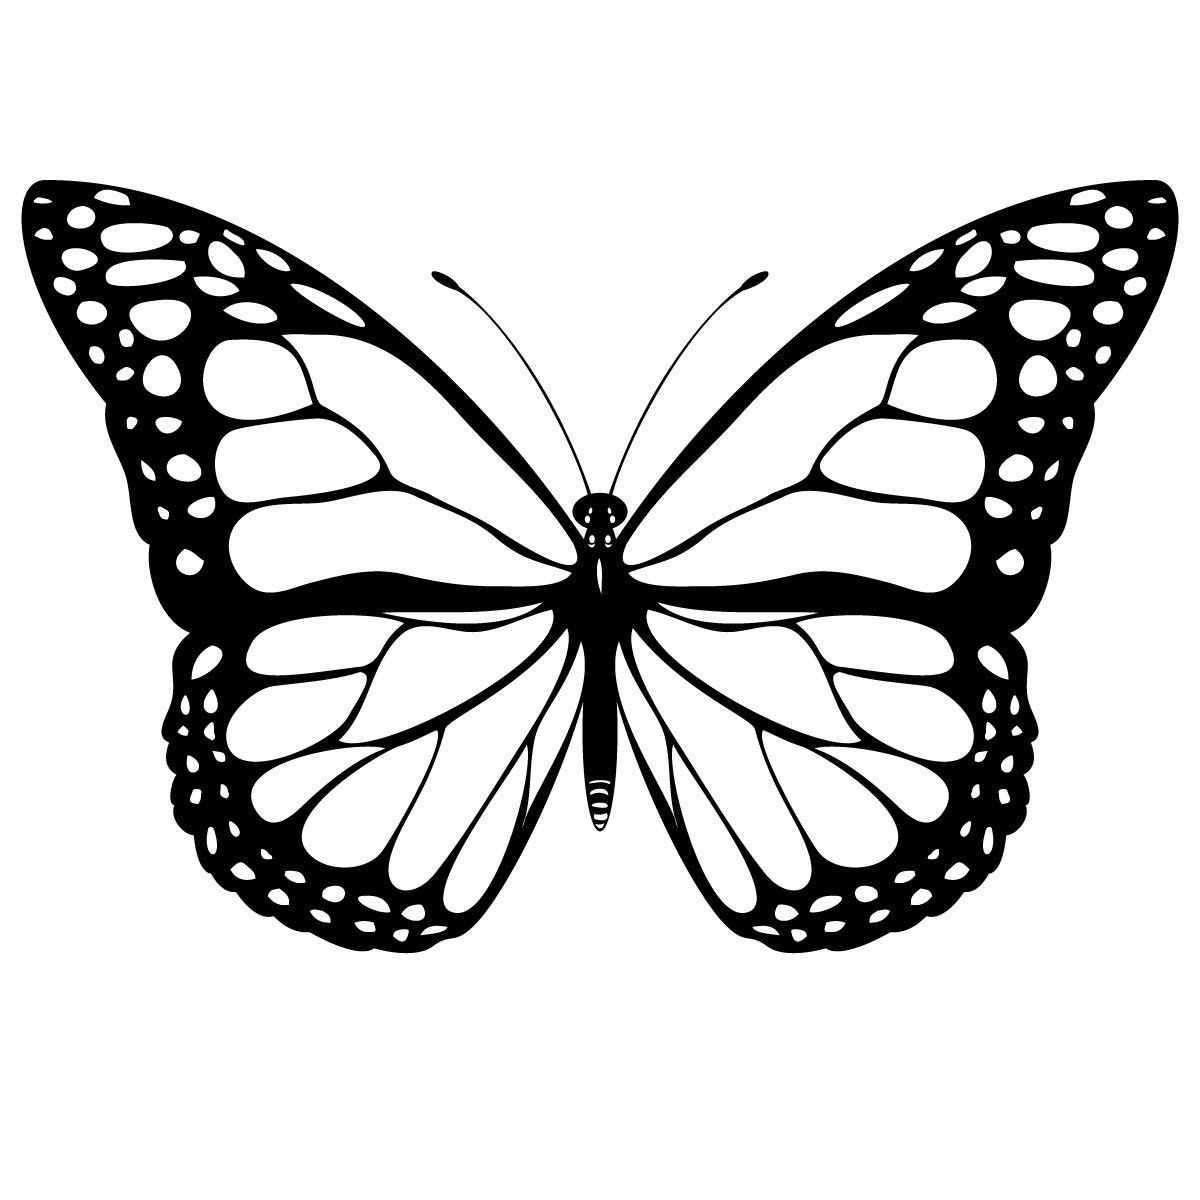 Free Printable Butterfly Coloring Pages For Kids | Butterfly - Free Printable Butterfly Coloring Pages